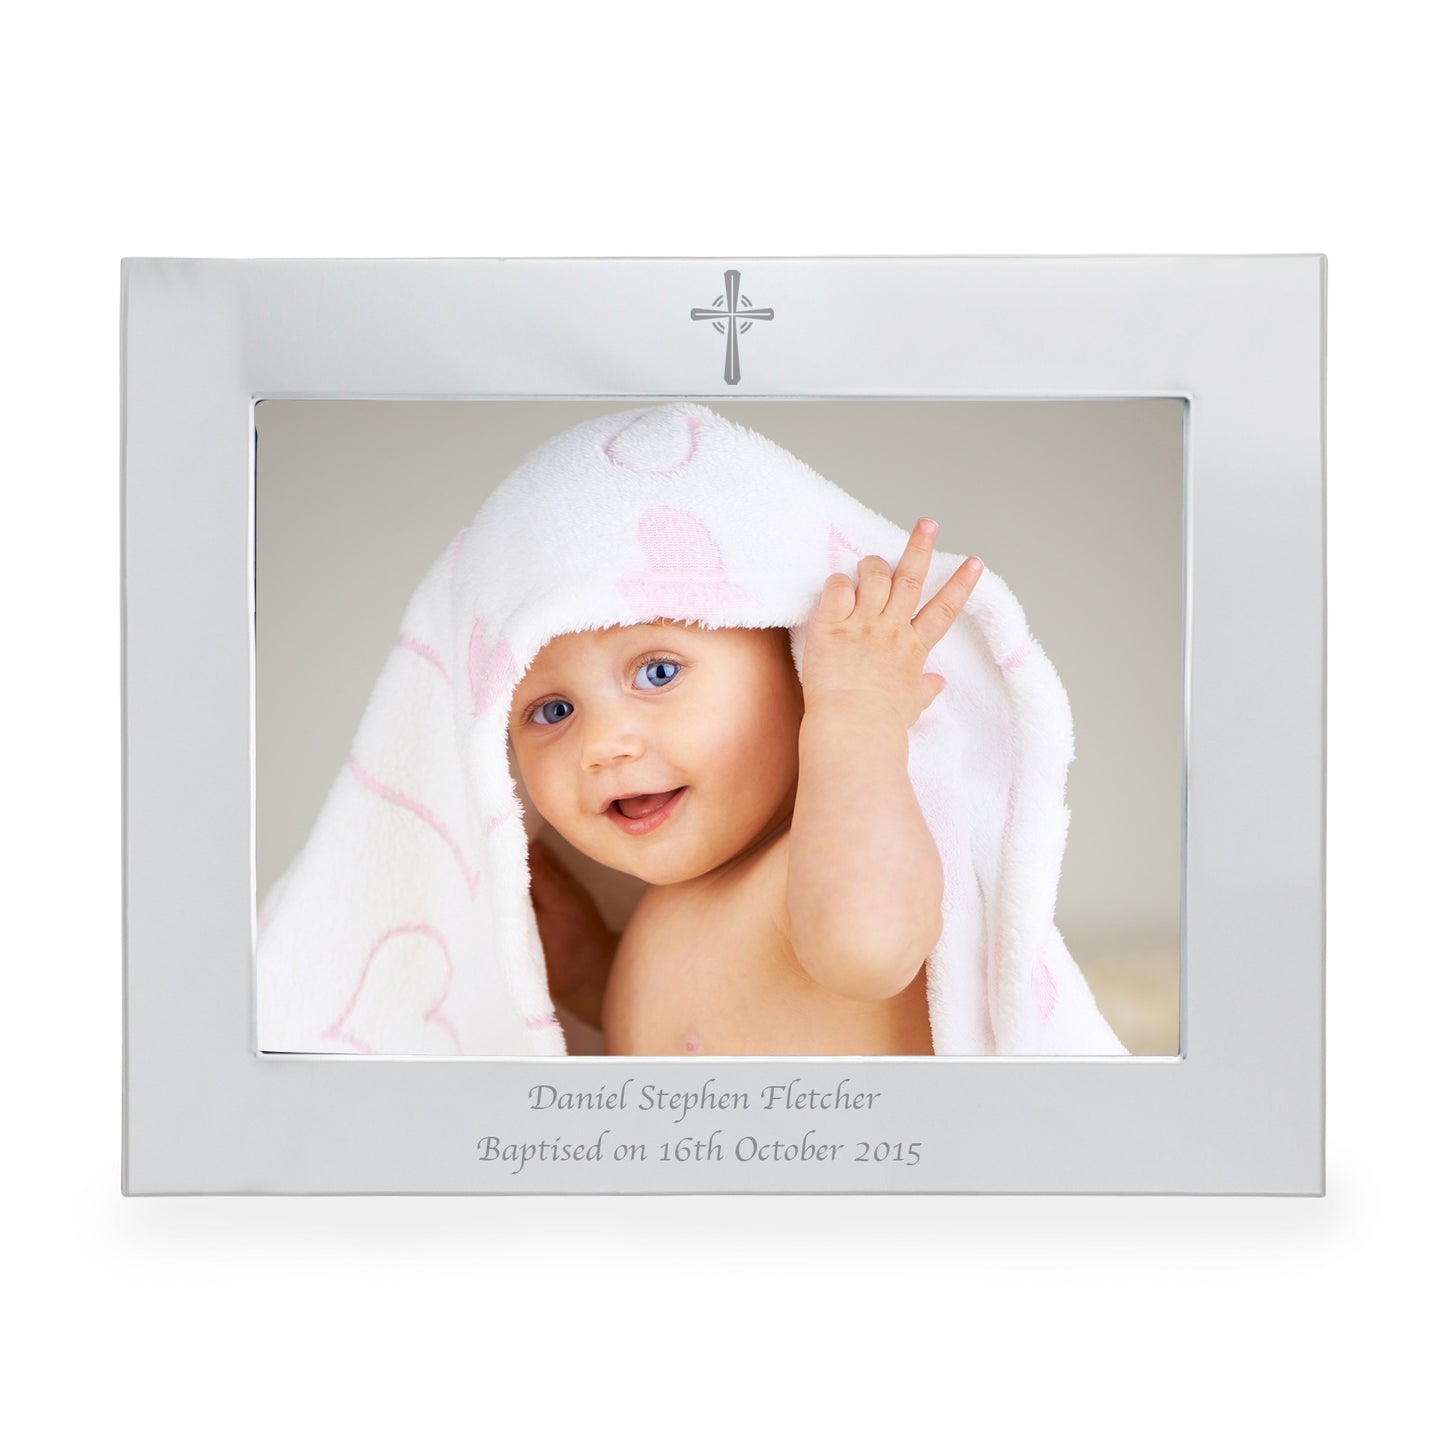 Personalised Silver 7x5 Landscape Cross Photo Frame - Personalise It!